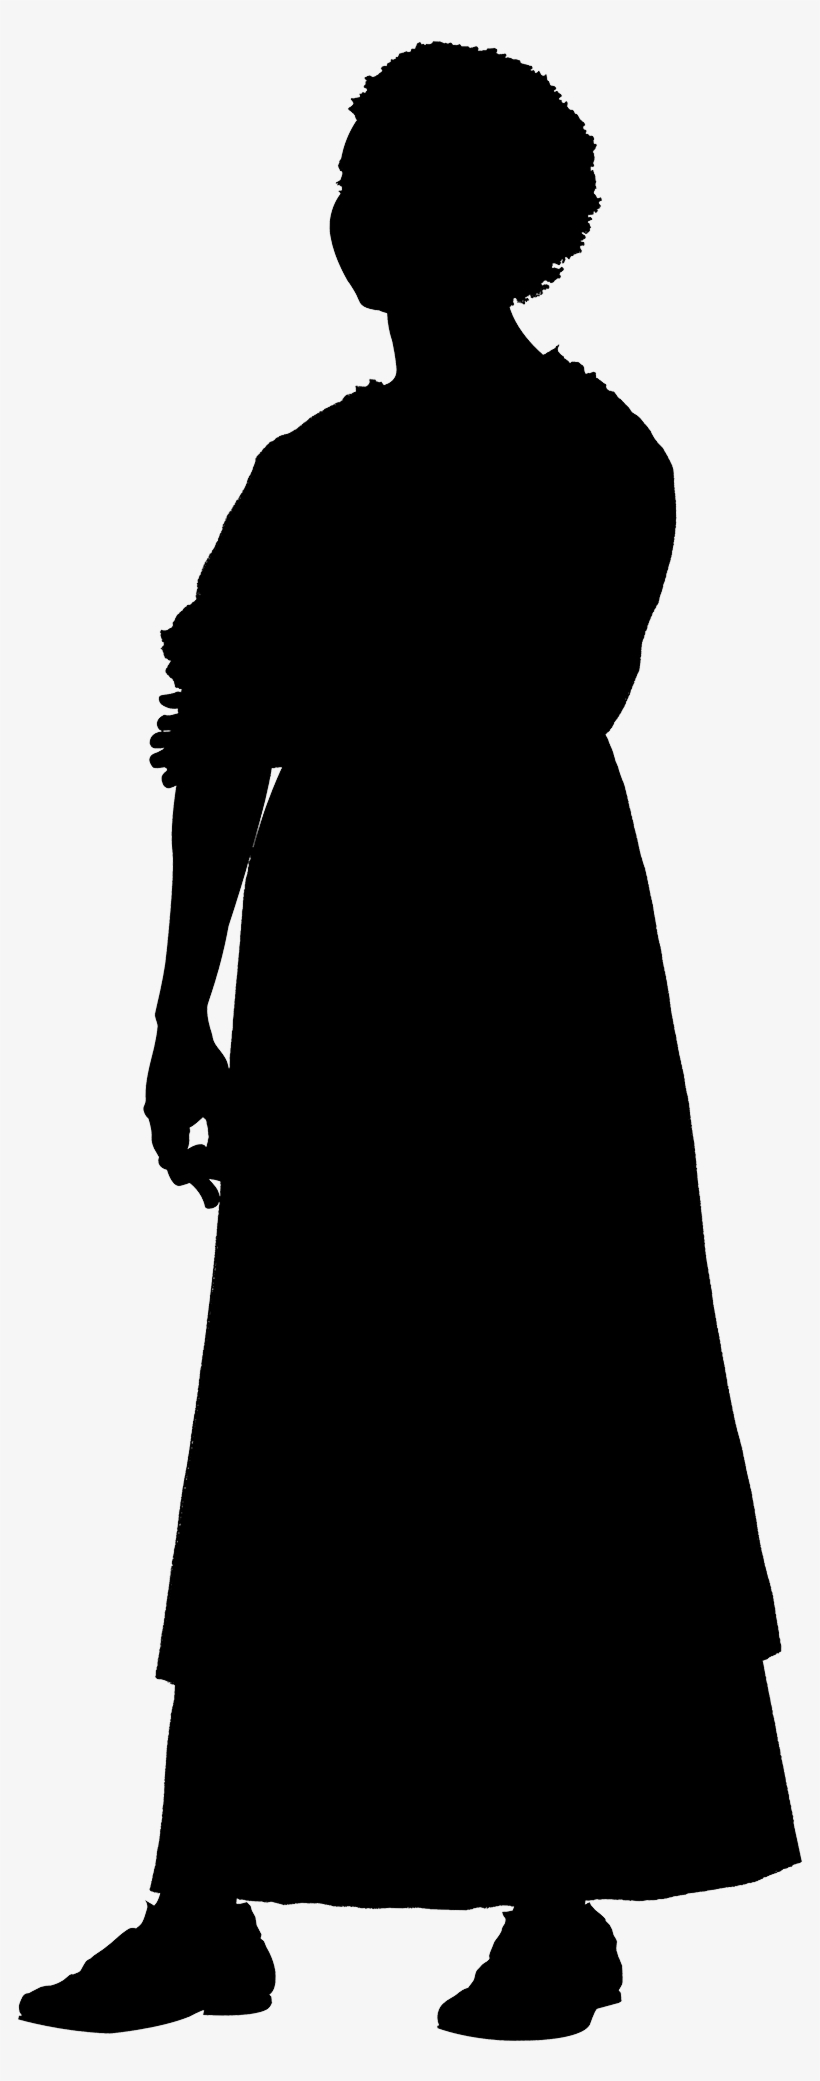 Lucy Biography George Washington's Mount Vernon - Double Bass Player Silhouette, transparent png #4705370